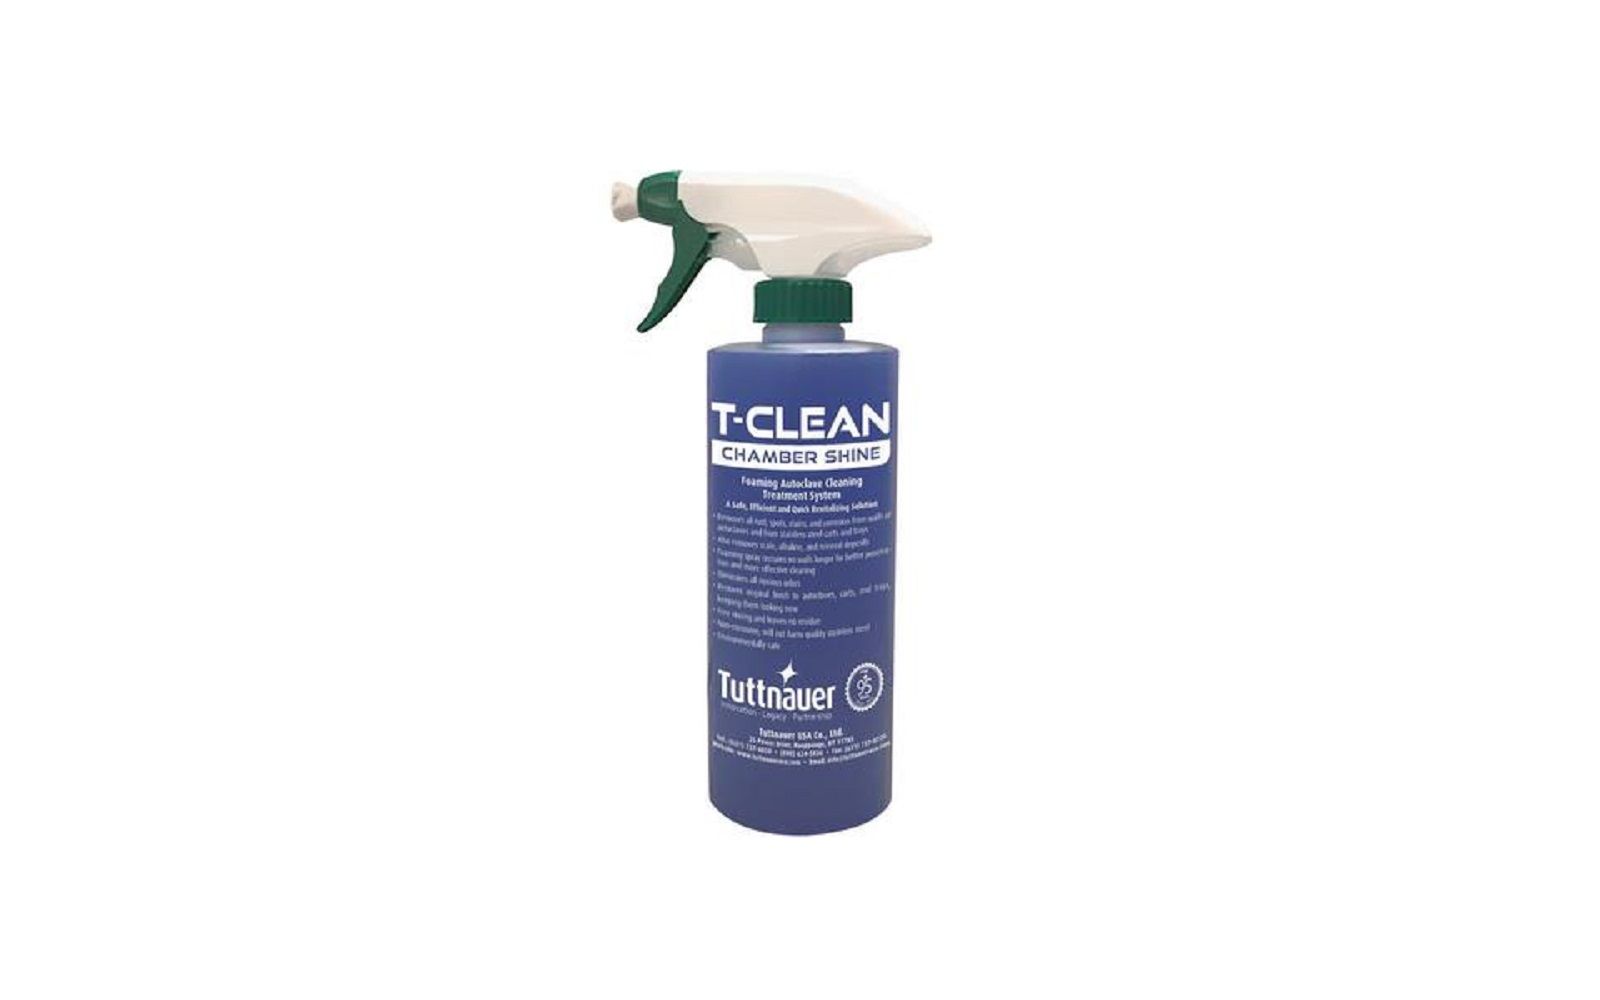 T-clean chamber shine autoclave cleaning treatment foam spray